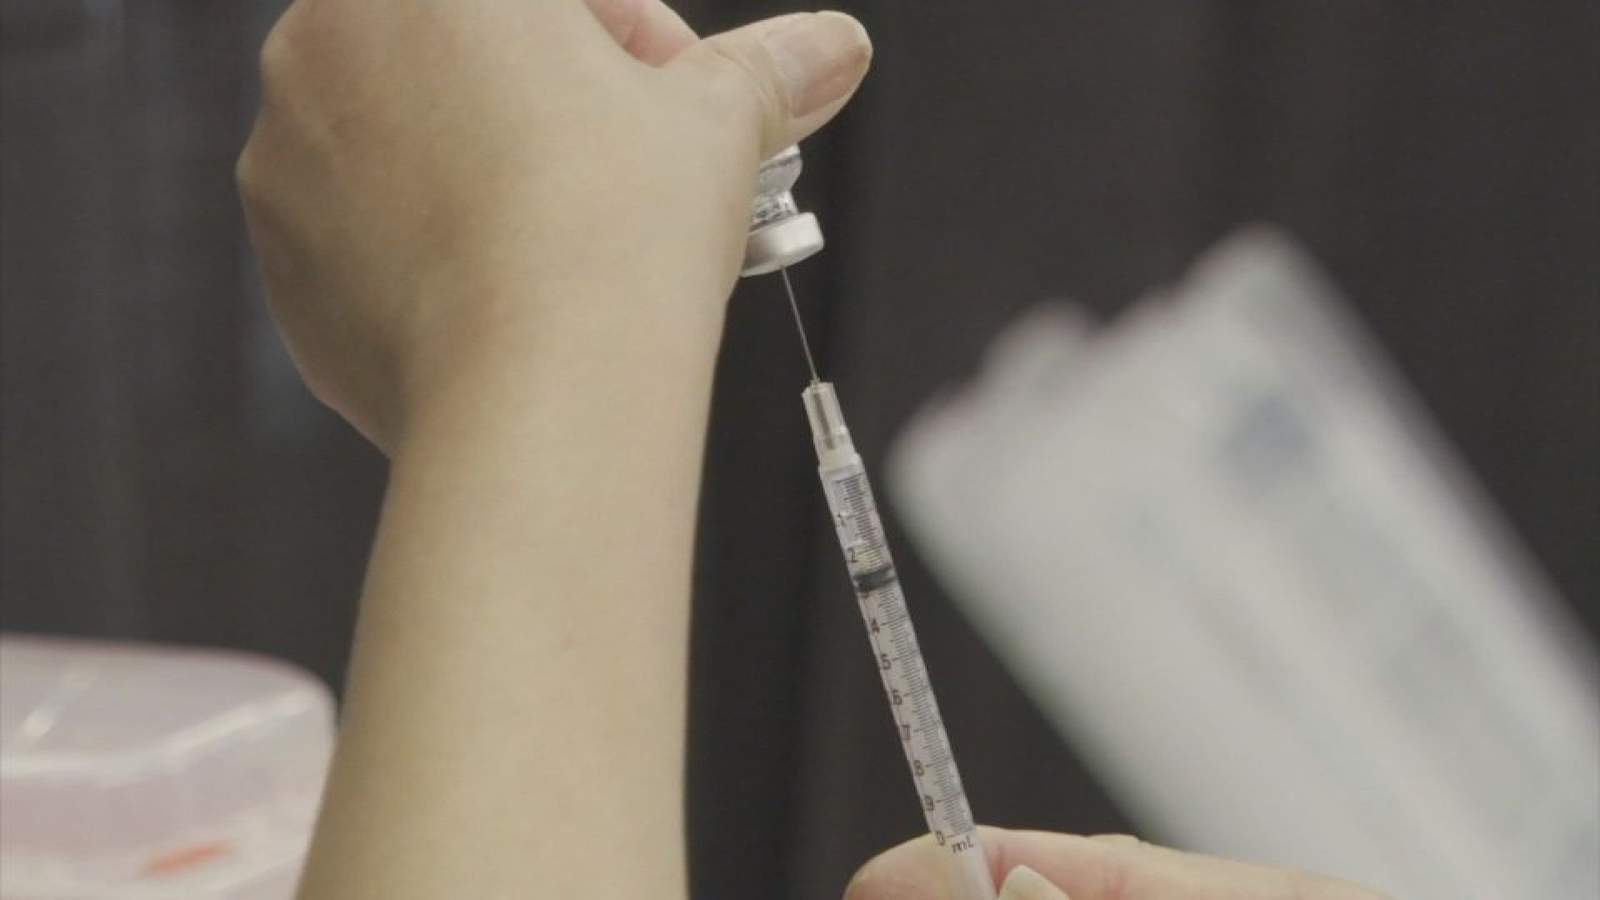 High schoolers could start being vaccinated by fall, Dr. Fauci says